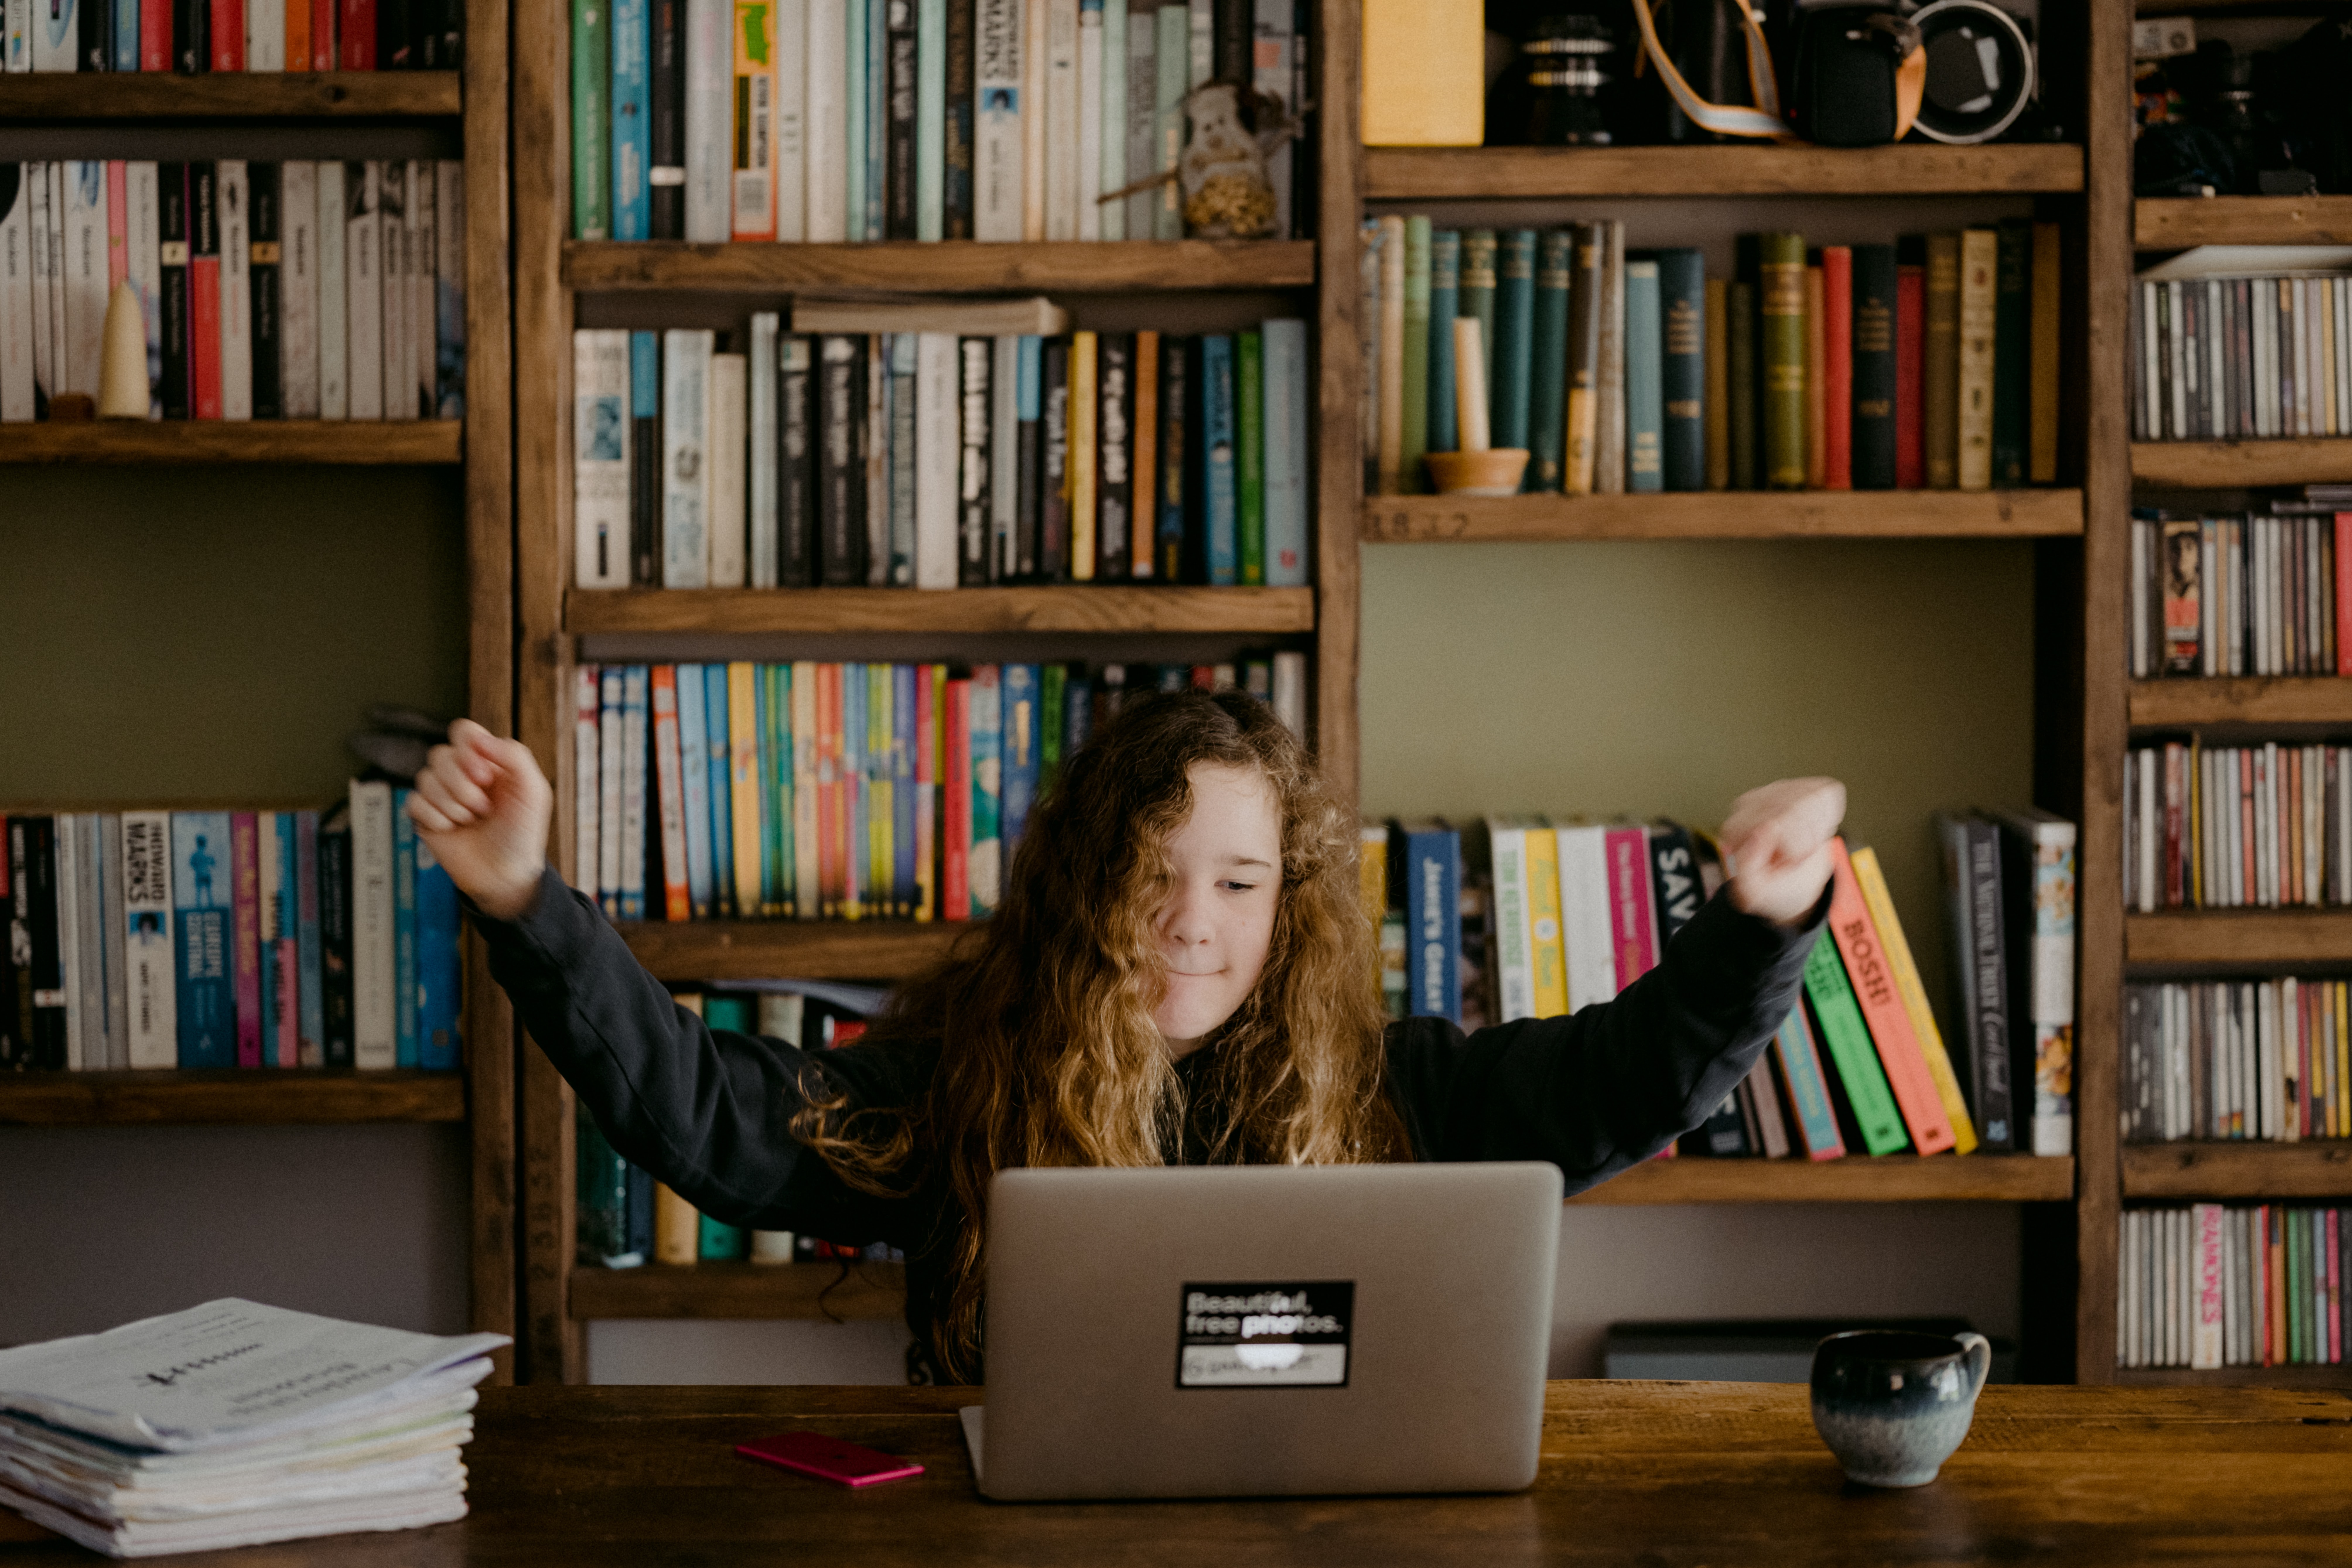 Girl with long hair on computer with shelves of books in background